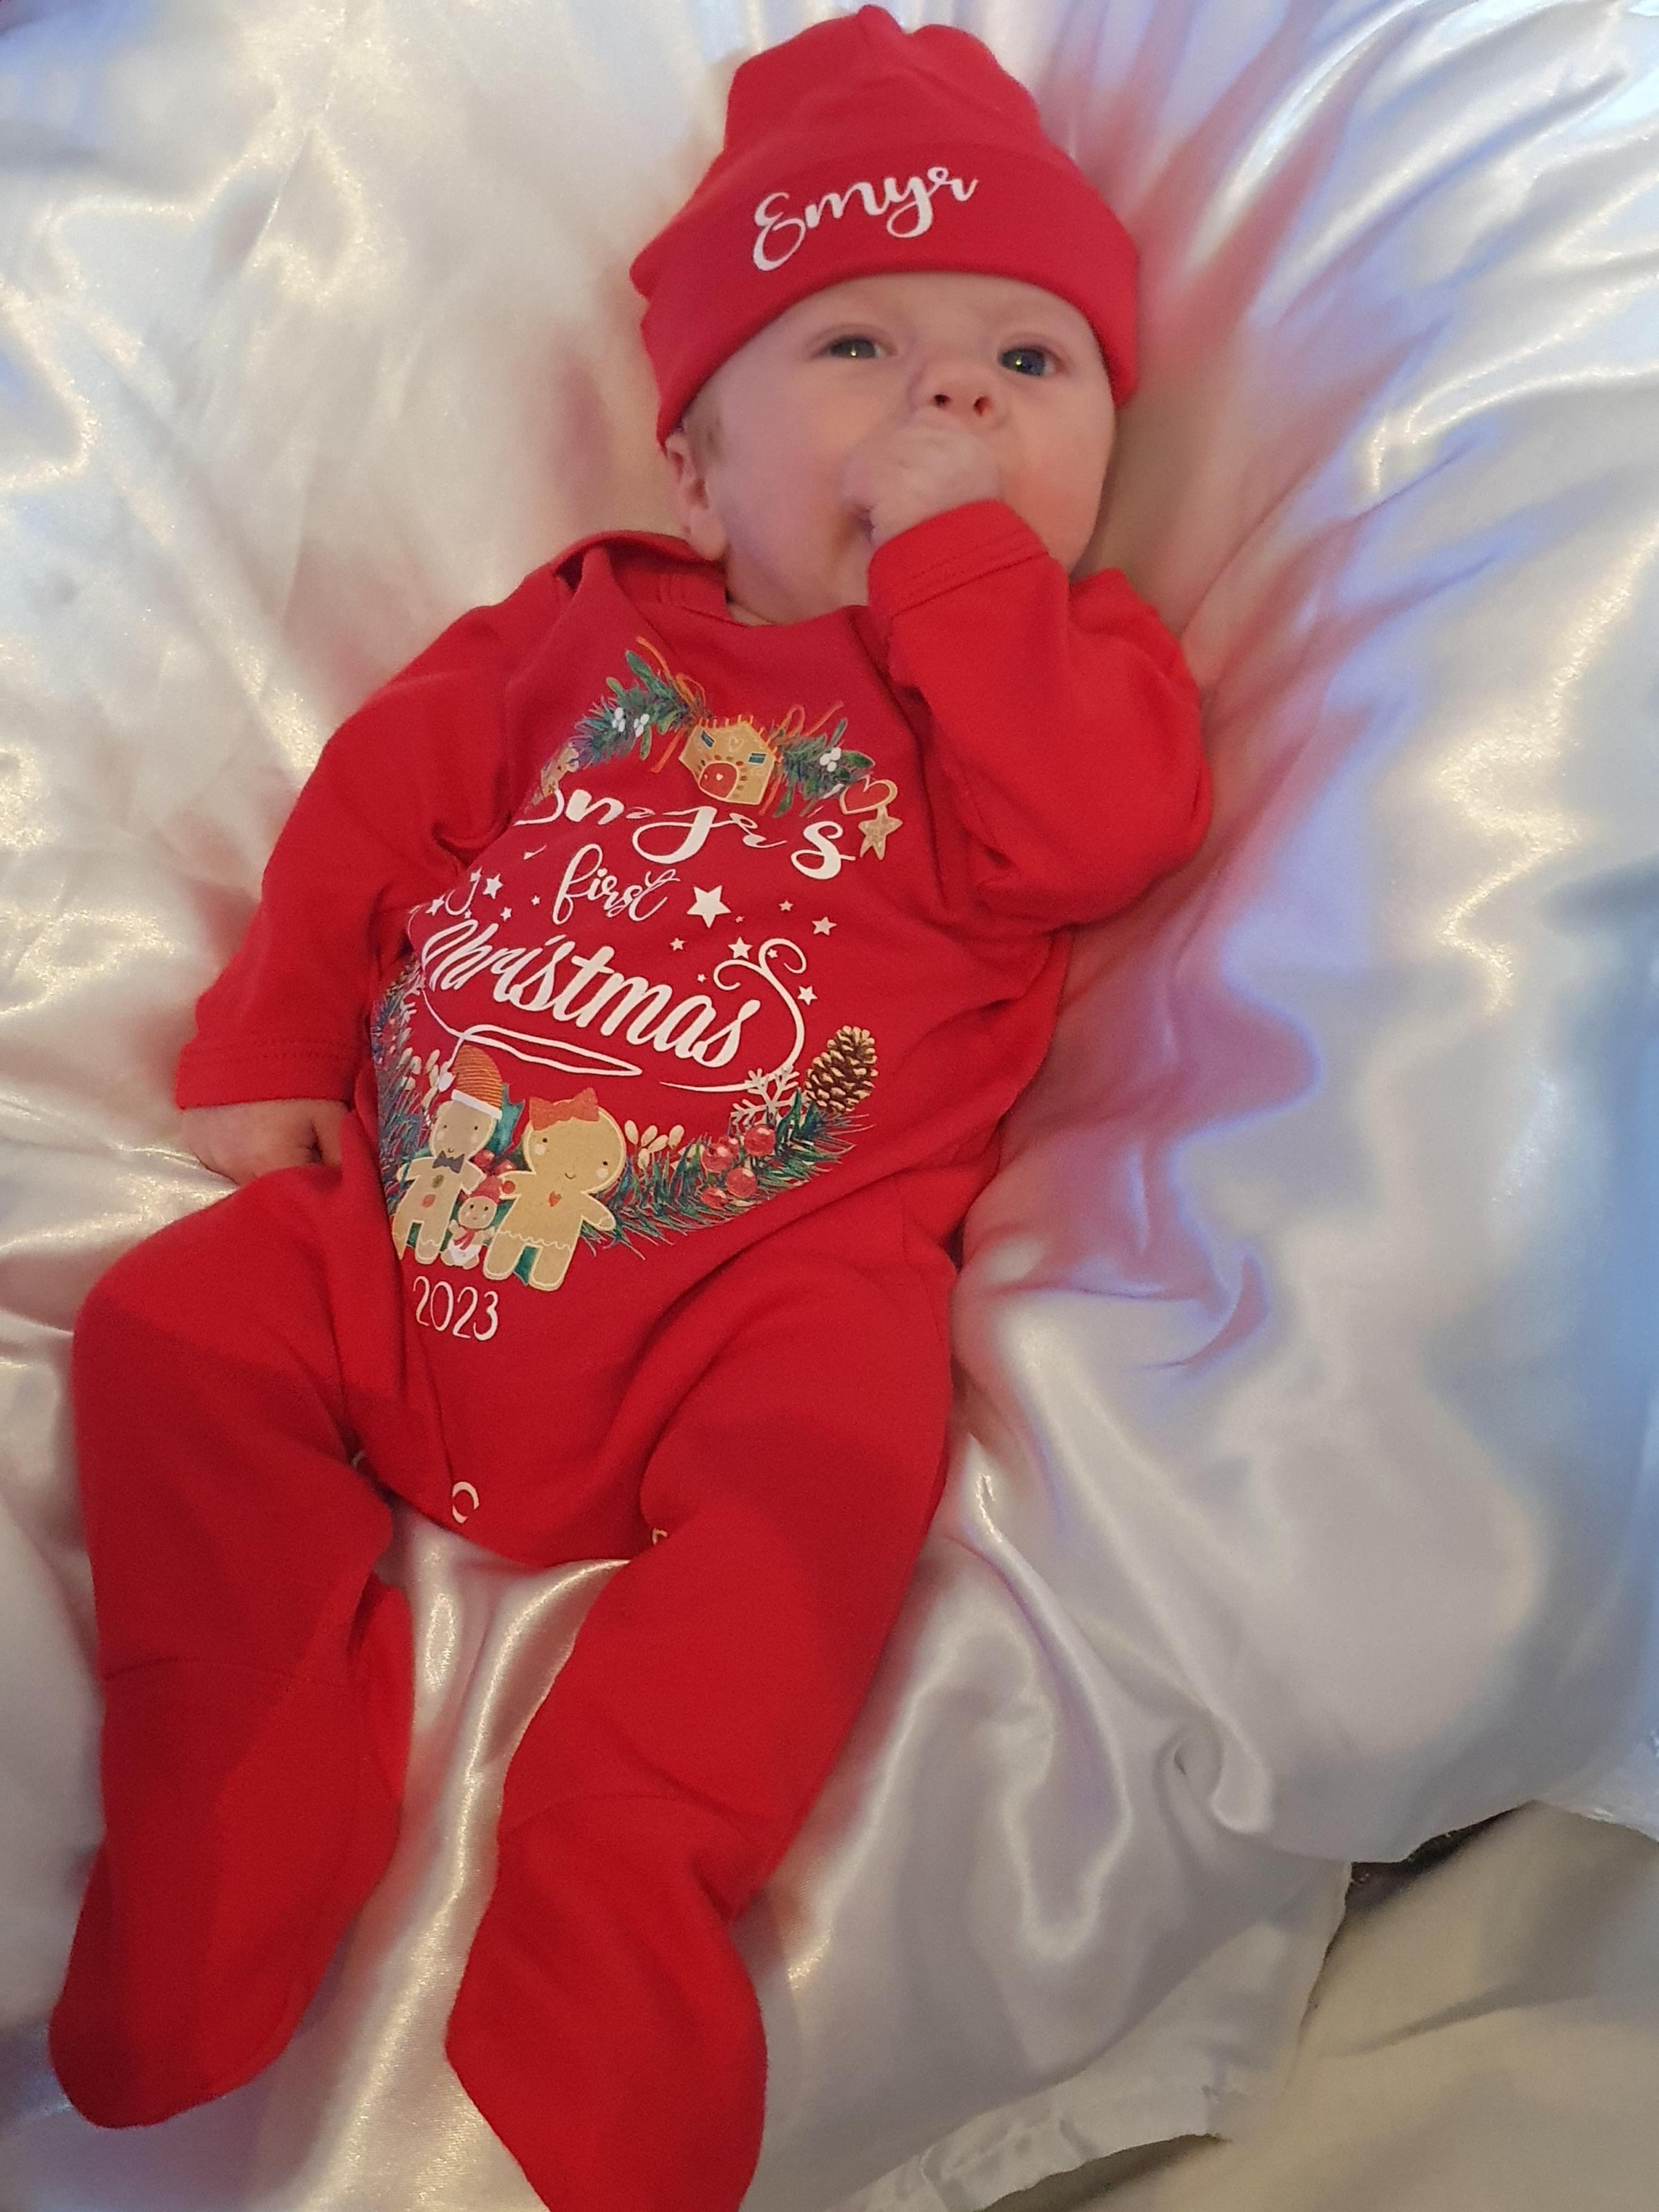 Charlotte Jones, from Acrefair in Wrexham: Two-month-old Emyr Timothy Moulsdale in his first Christmas outfit. Mum Lottie, dad Keiran and big sister Lilly are looking forward to Christmas, as family of four.